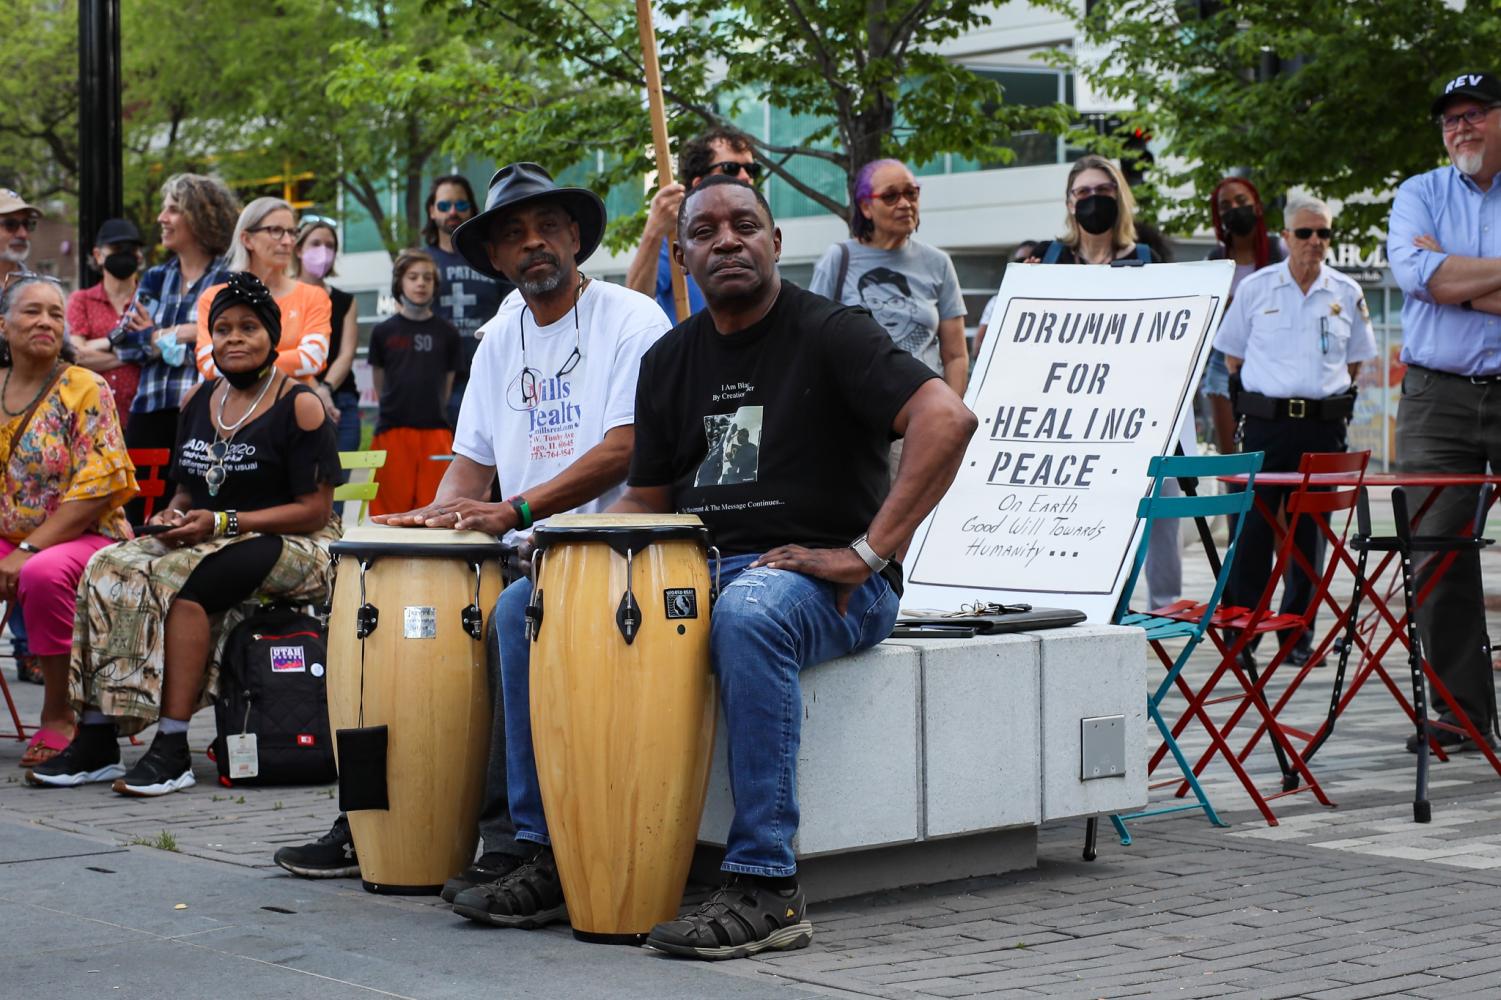 Two people sit behind drums, in front of a sign reading “Drumming for Healing Peace.”